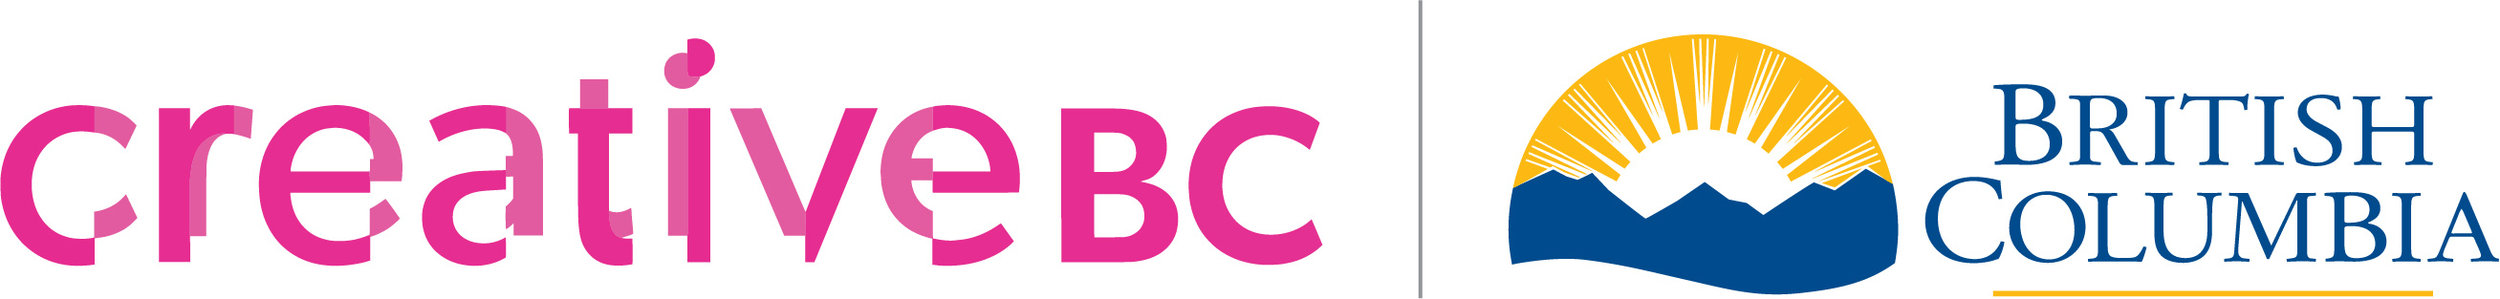 Burnaby Pride is a lucky recipient of  Creative BC Amplify BC Live Music    funding to support local artists and the expansion of local festivals and events. We are very grateful for their support.